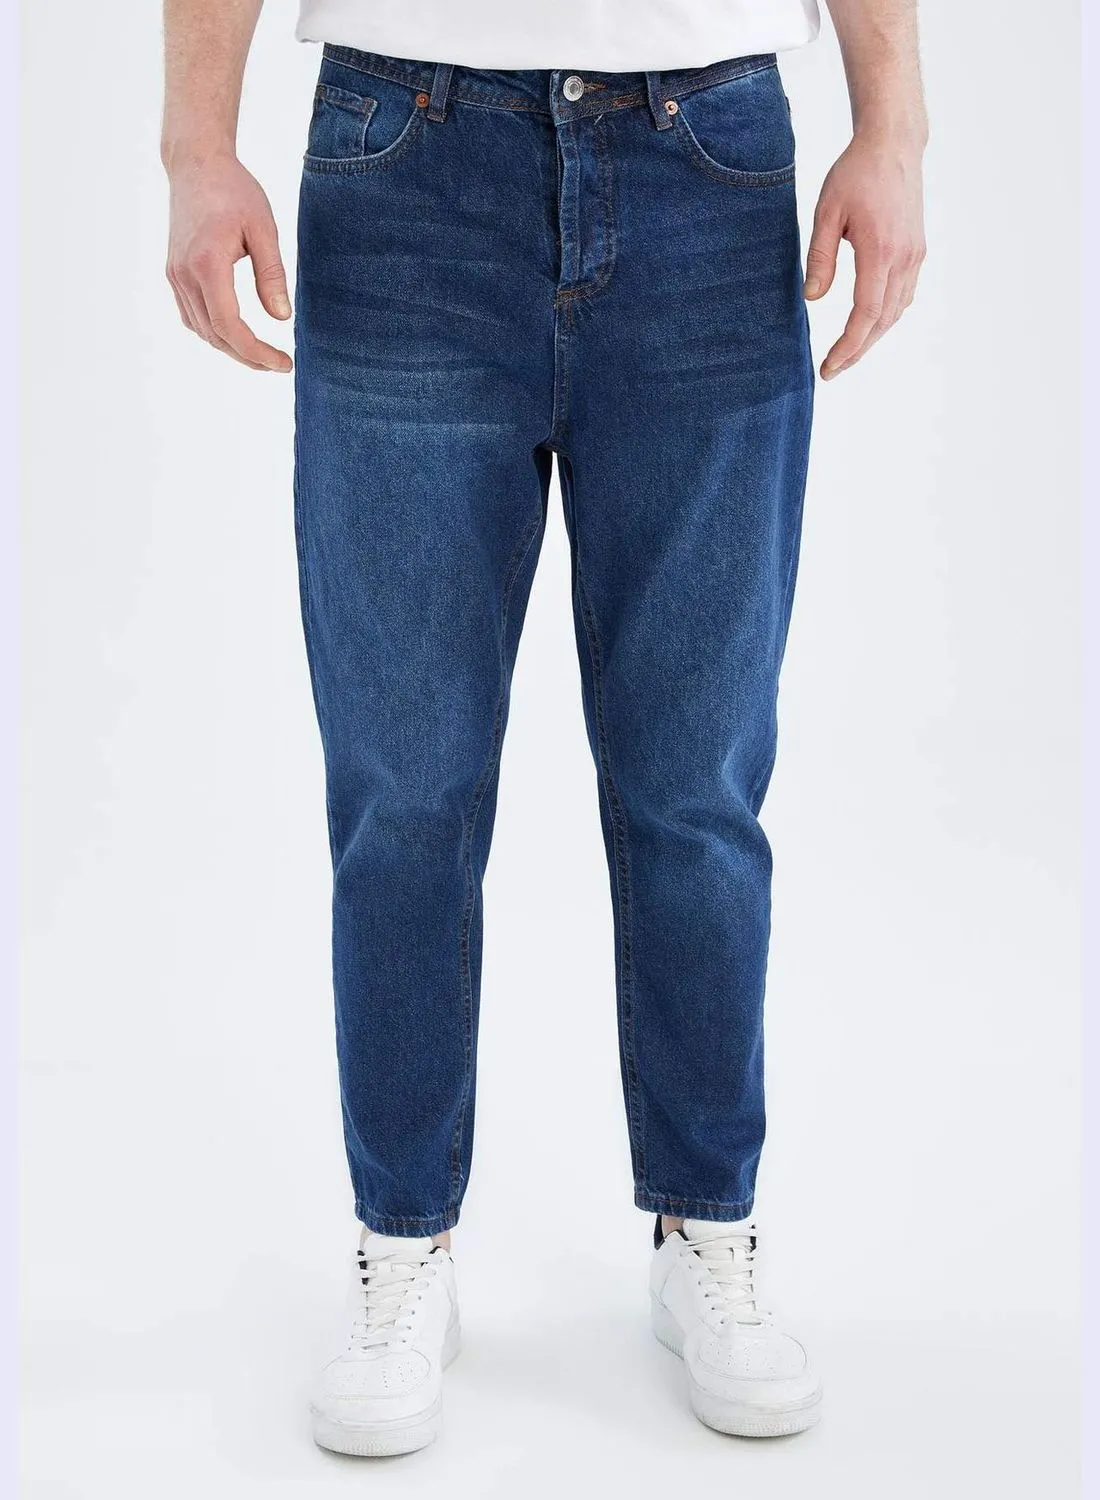 DeFacto Loose Fit Straight Leg Jeans